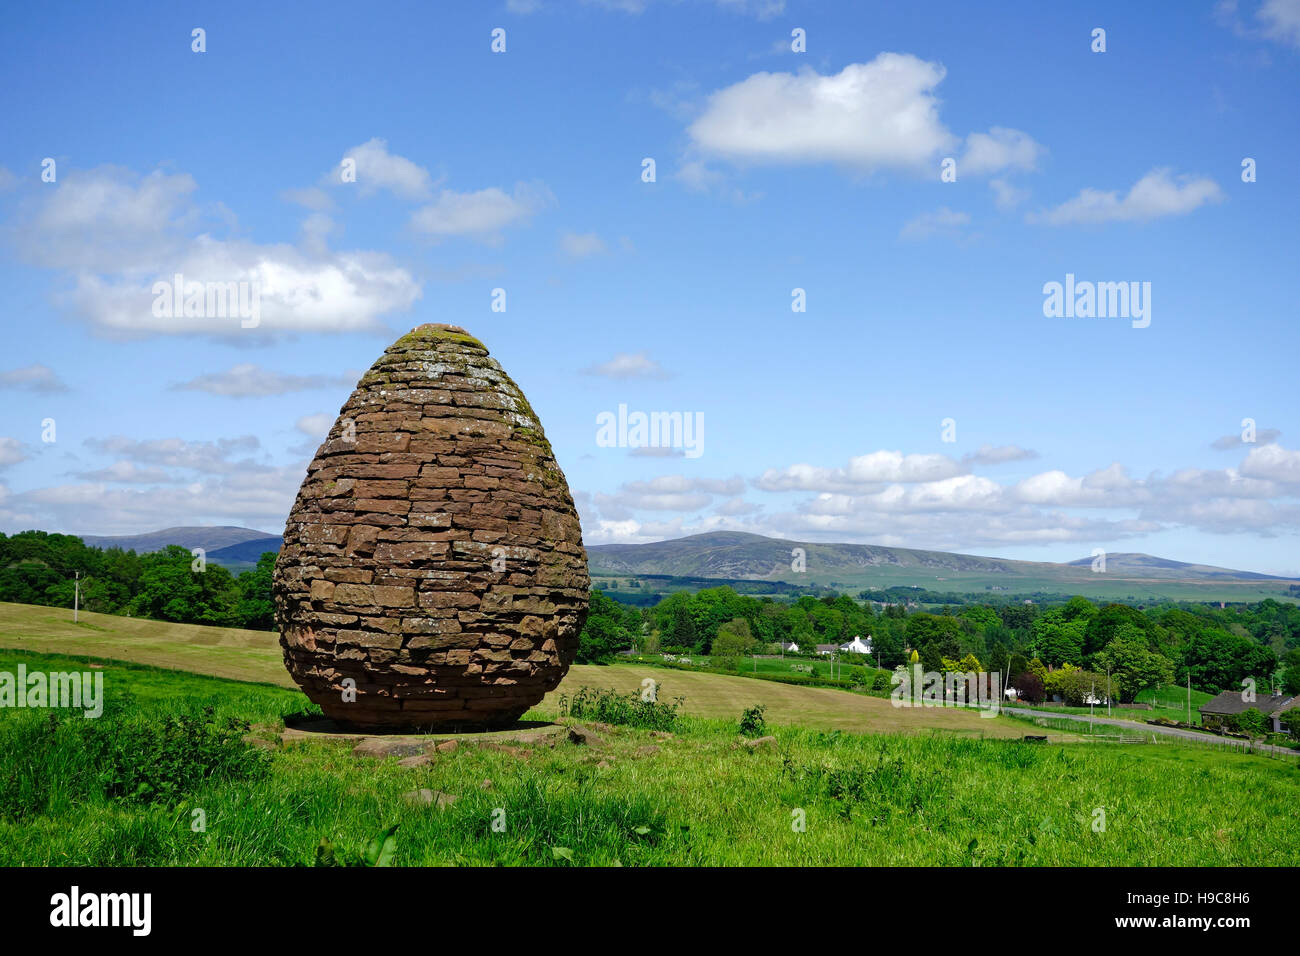 Modern Art Sculpture by Andy Goldsworthy, Stepends Farm, Nr Penpont, Nithsdale, Dumfries and Galloway, Scotland, UK Stock Photo